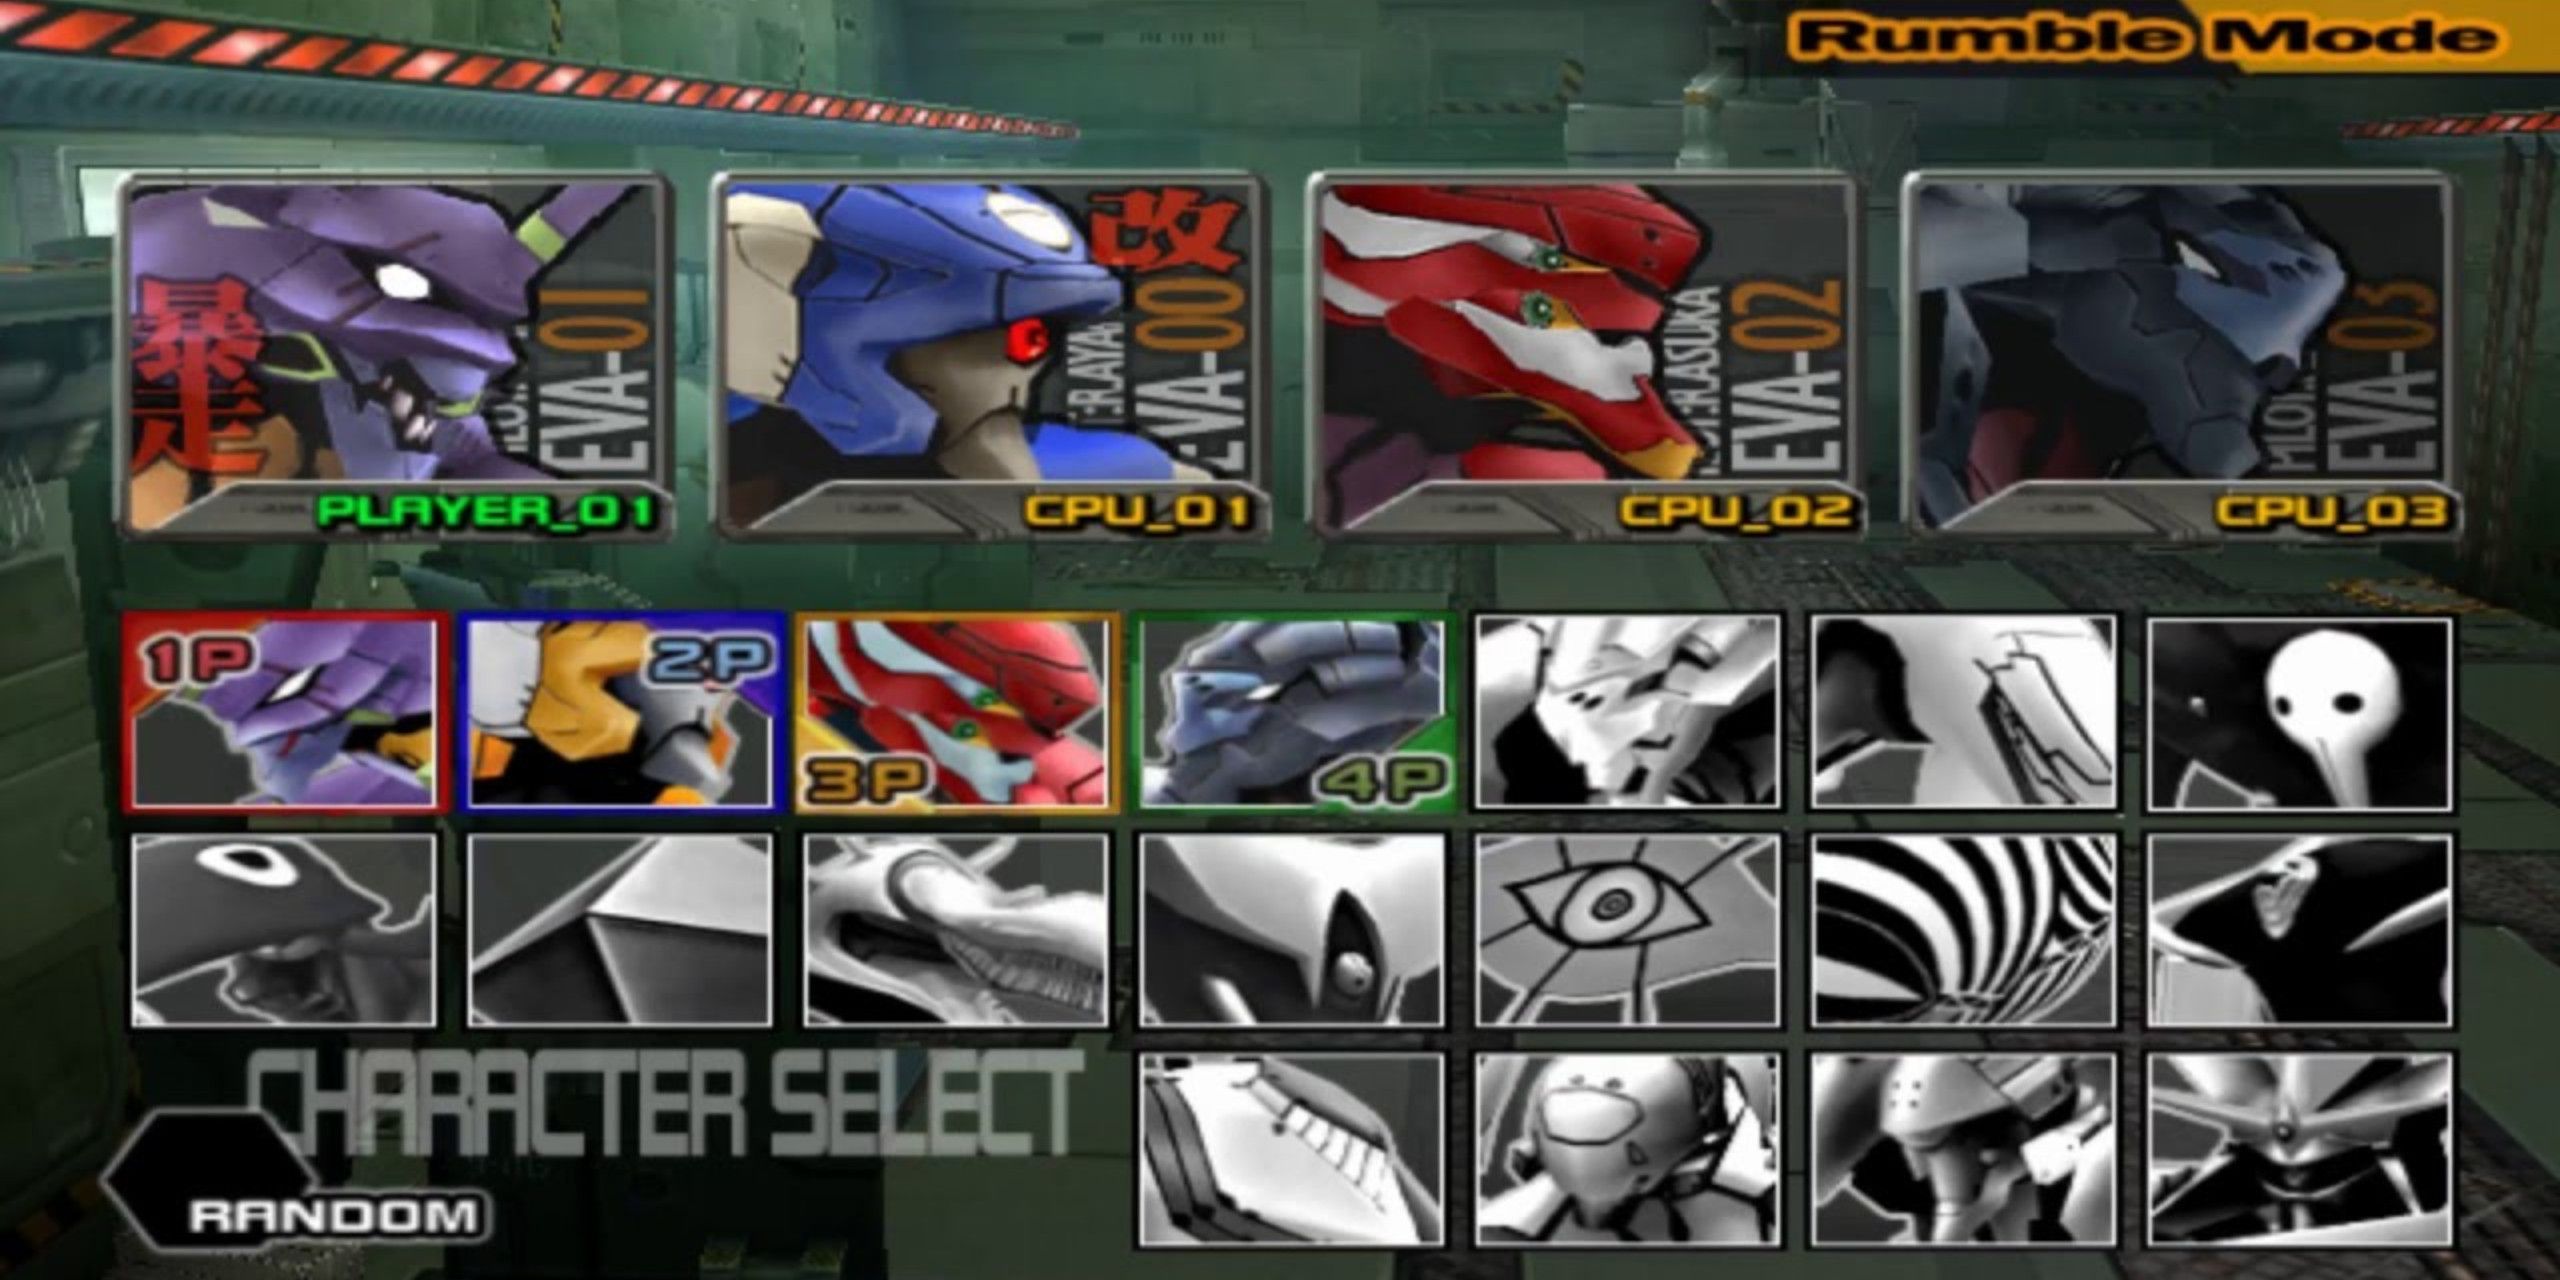 Character select screen featuring all the playable Eva Unit and Angel characters